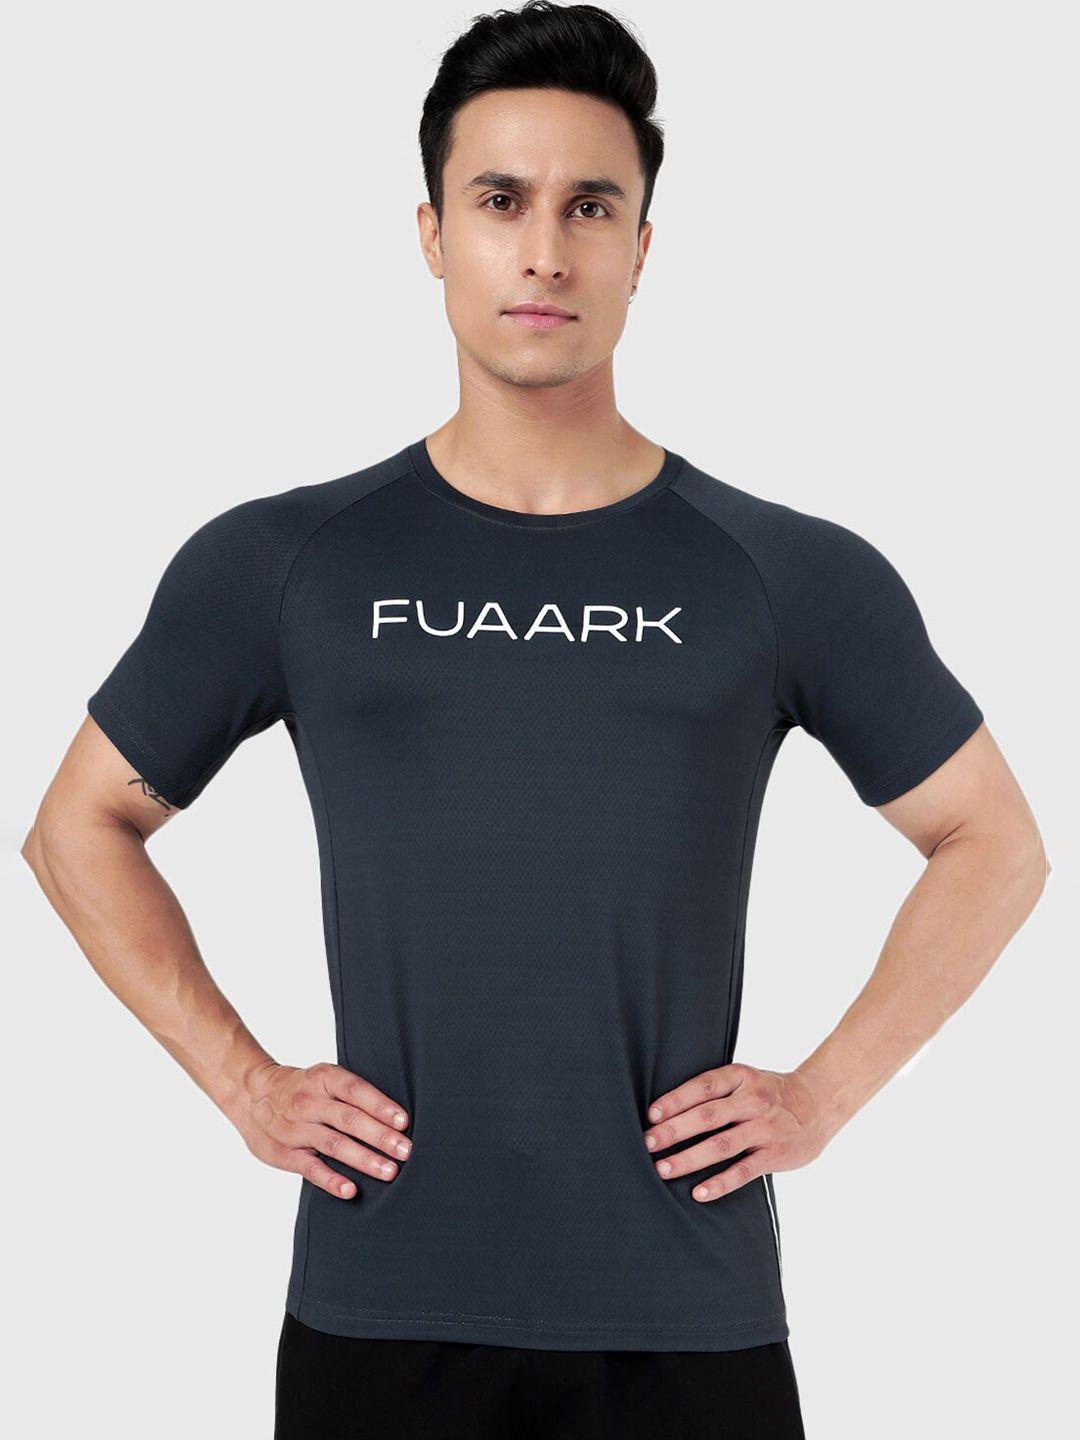 FUAARK Typography Printed Anti Odour Sports T-shirt